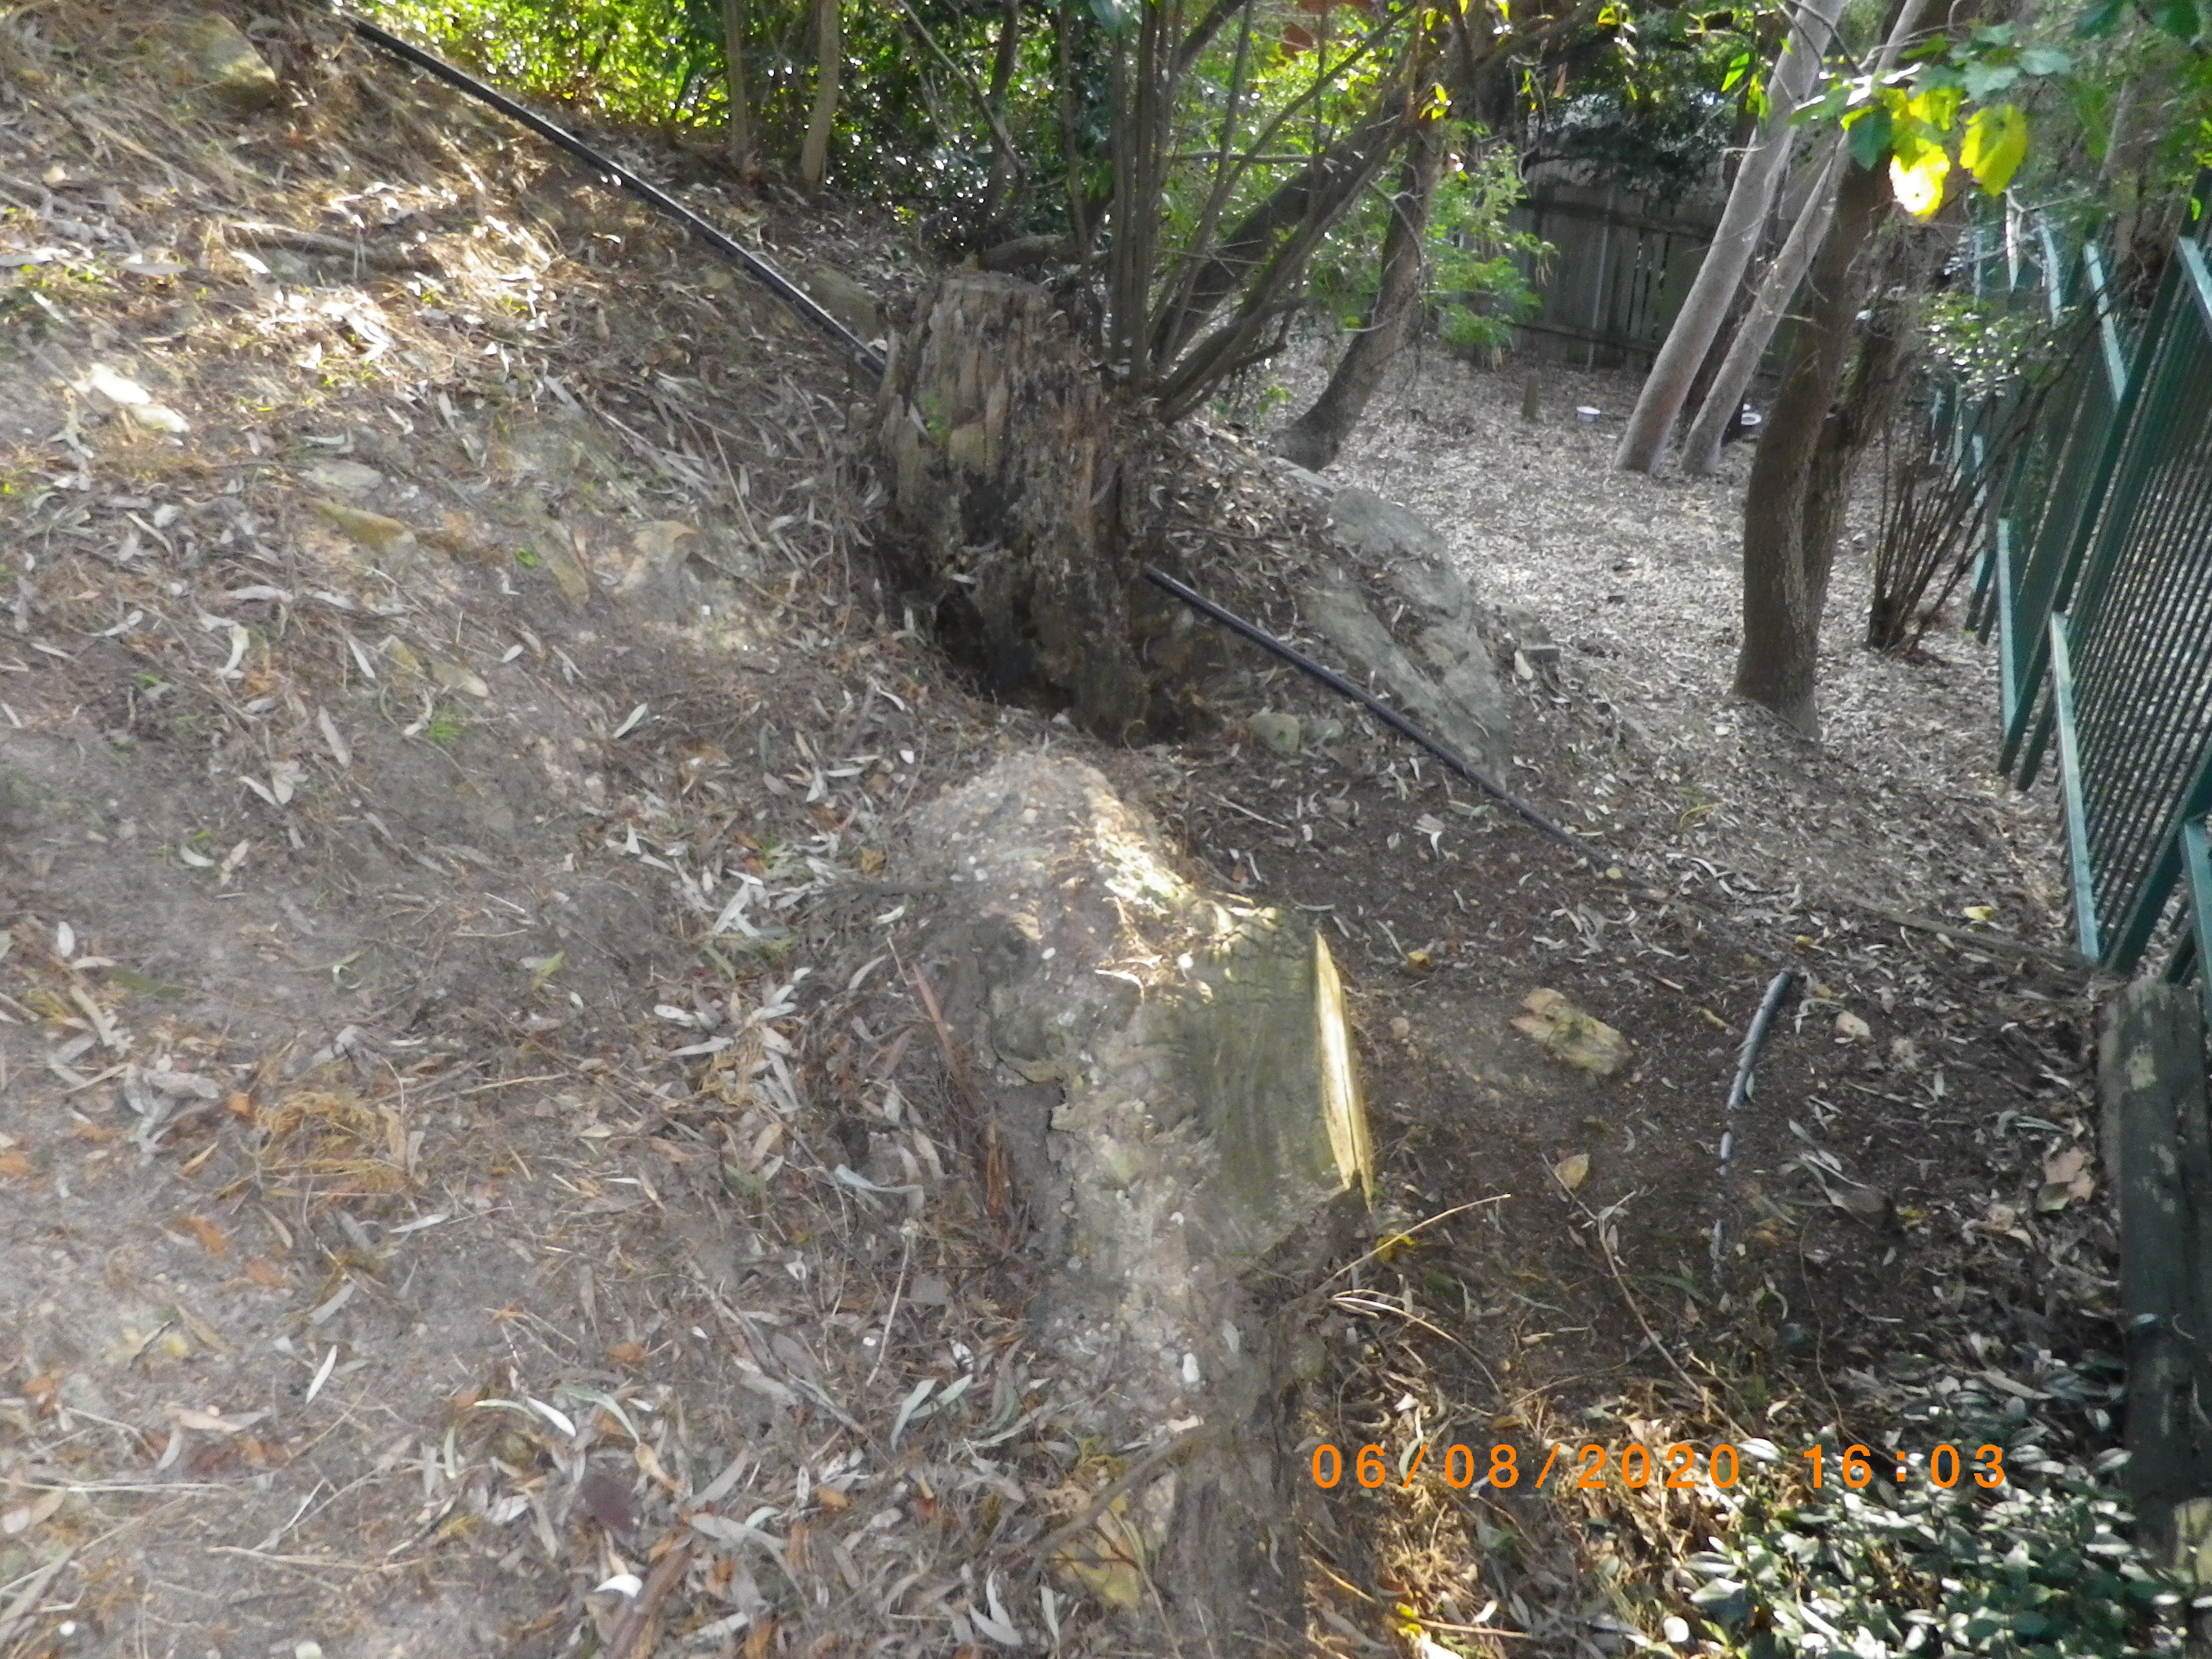 SP52948-eroded-soil-after-fallen-tree-in-late-2018-behind-townhouses-photo-1-6Aug2020.jpg